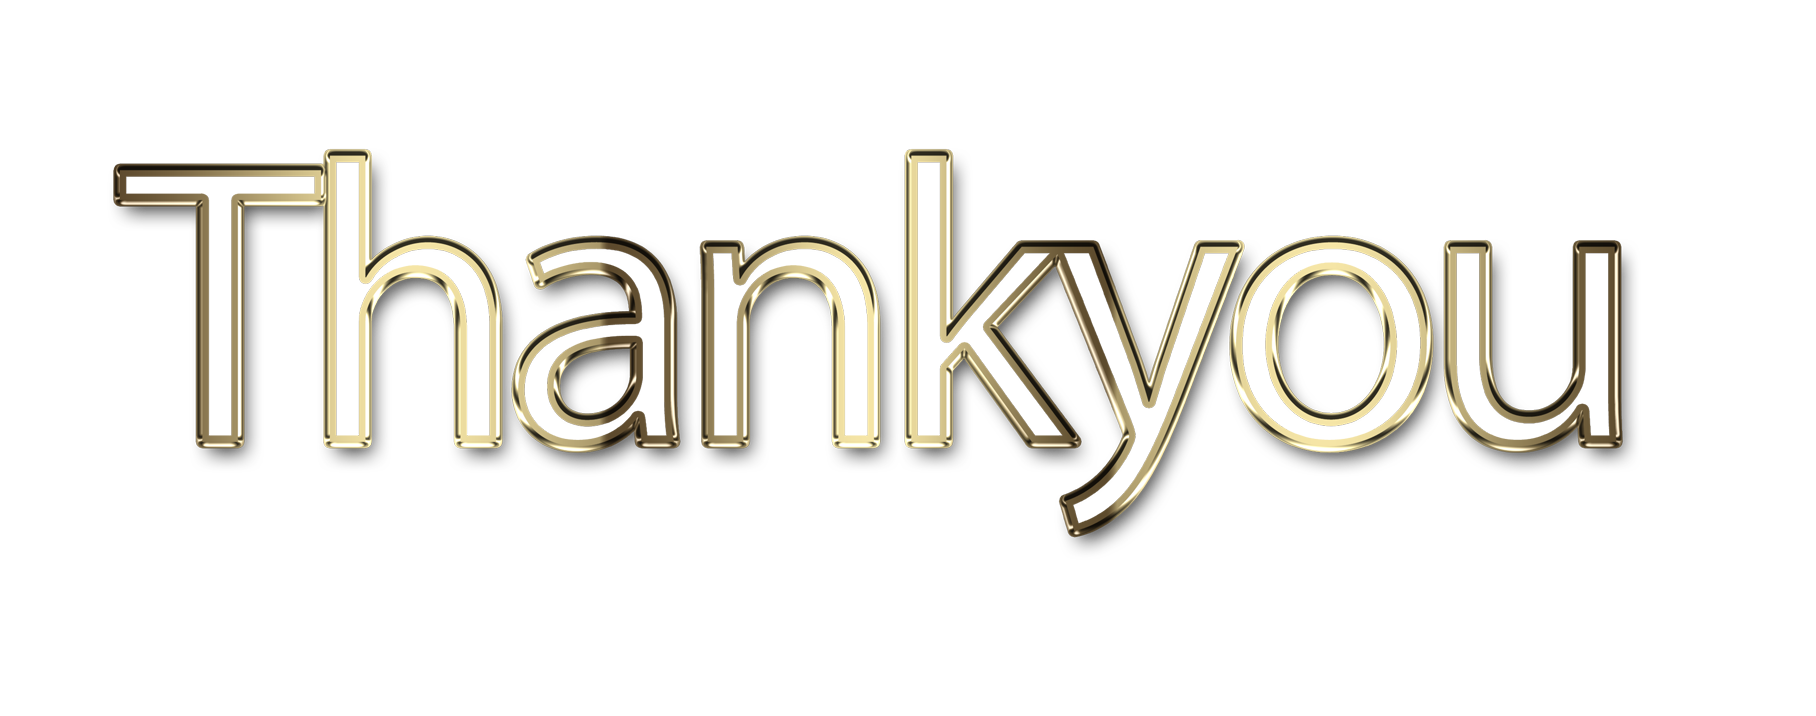 Thankyou png, word Thankyou png, Thankyou word png, Thankyou text png, Thankyou letters png, Thankyou word art typography PNG images, transparent png